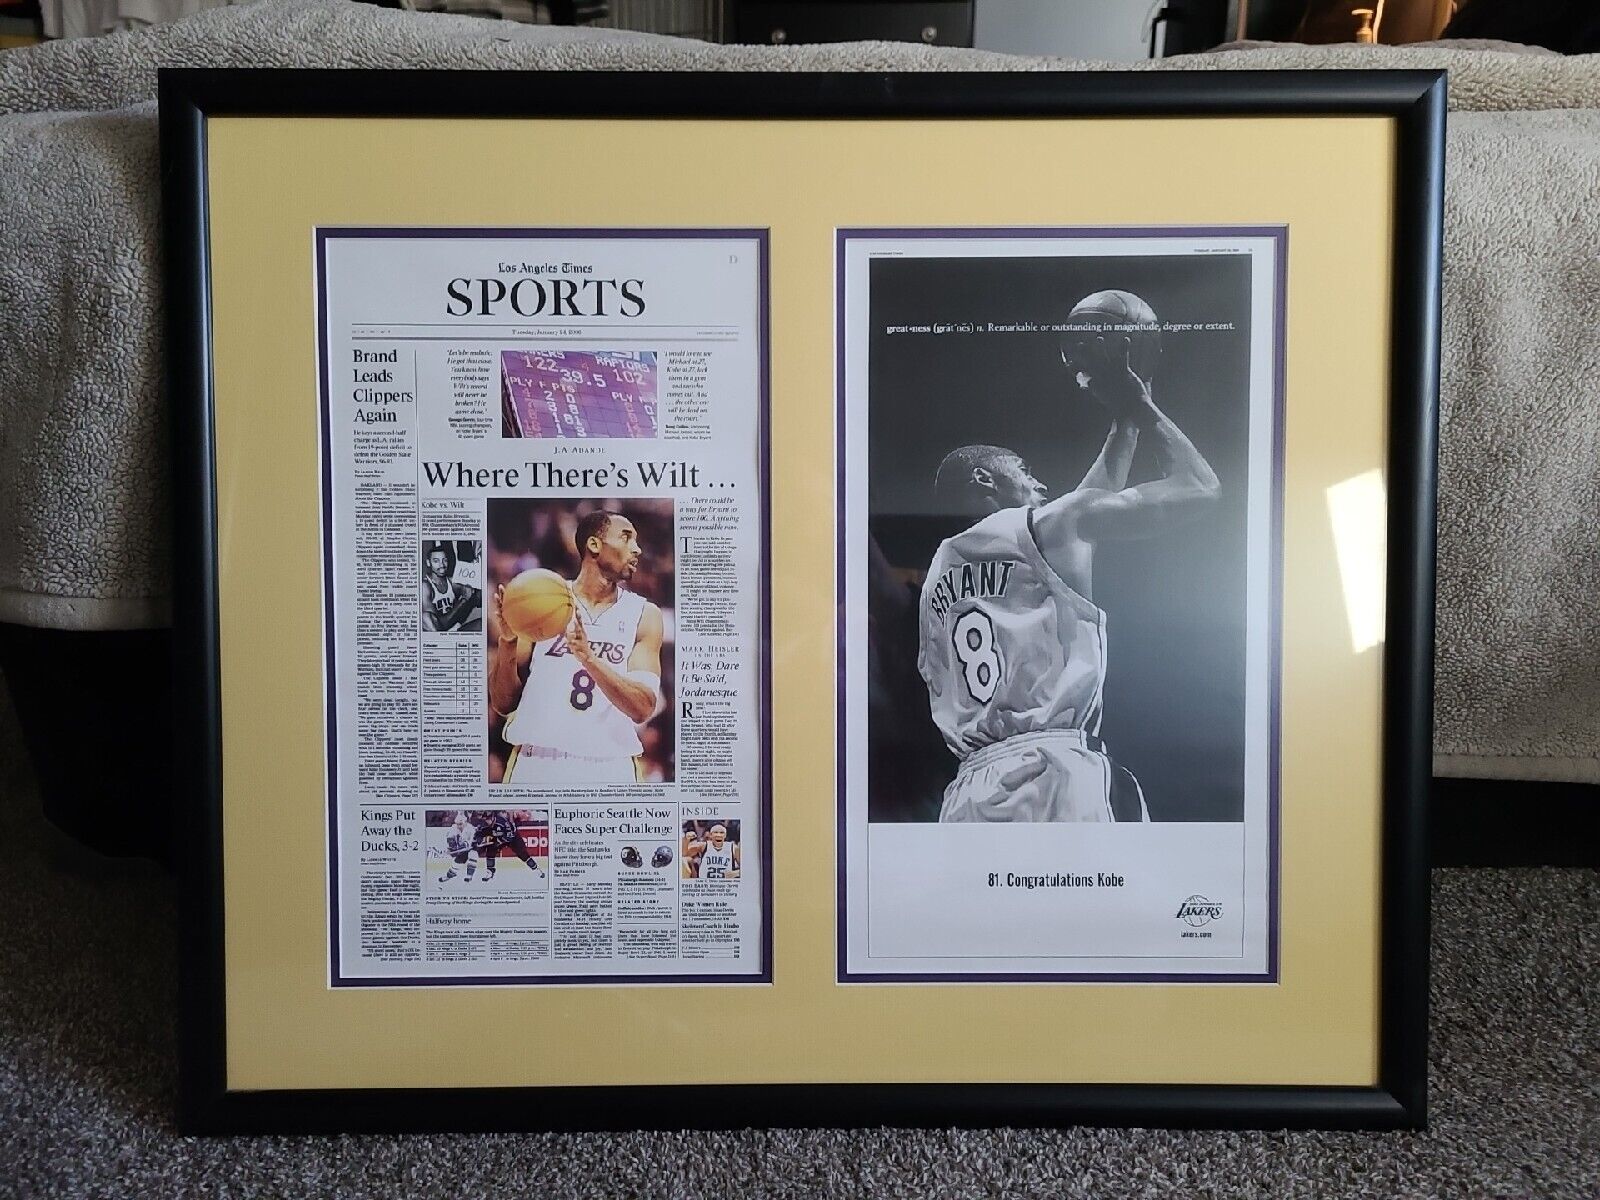 L. A. Times Kobe Bryant 81 Point Game Staples Center Giveaway. Custom Framed